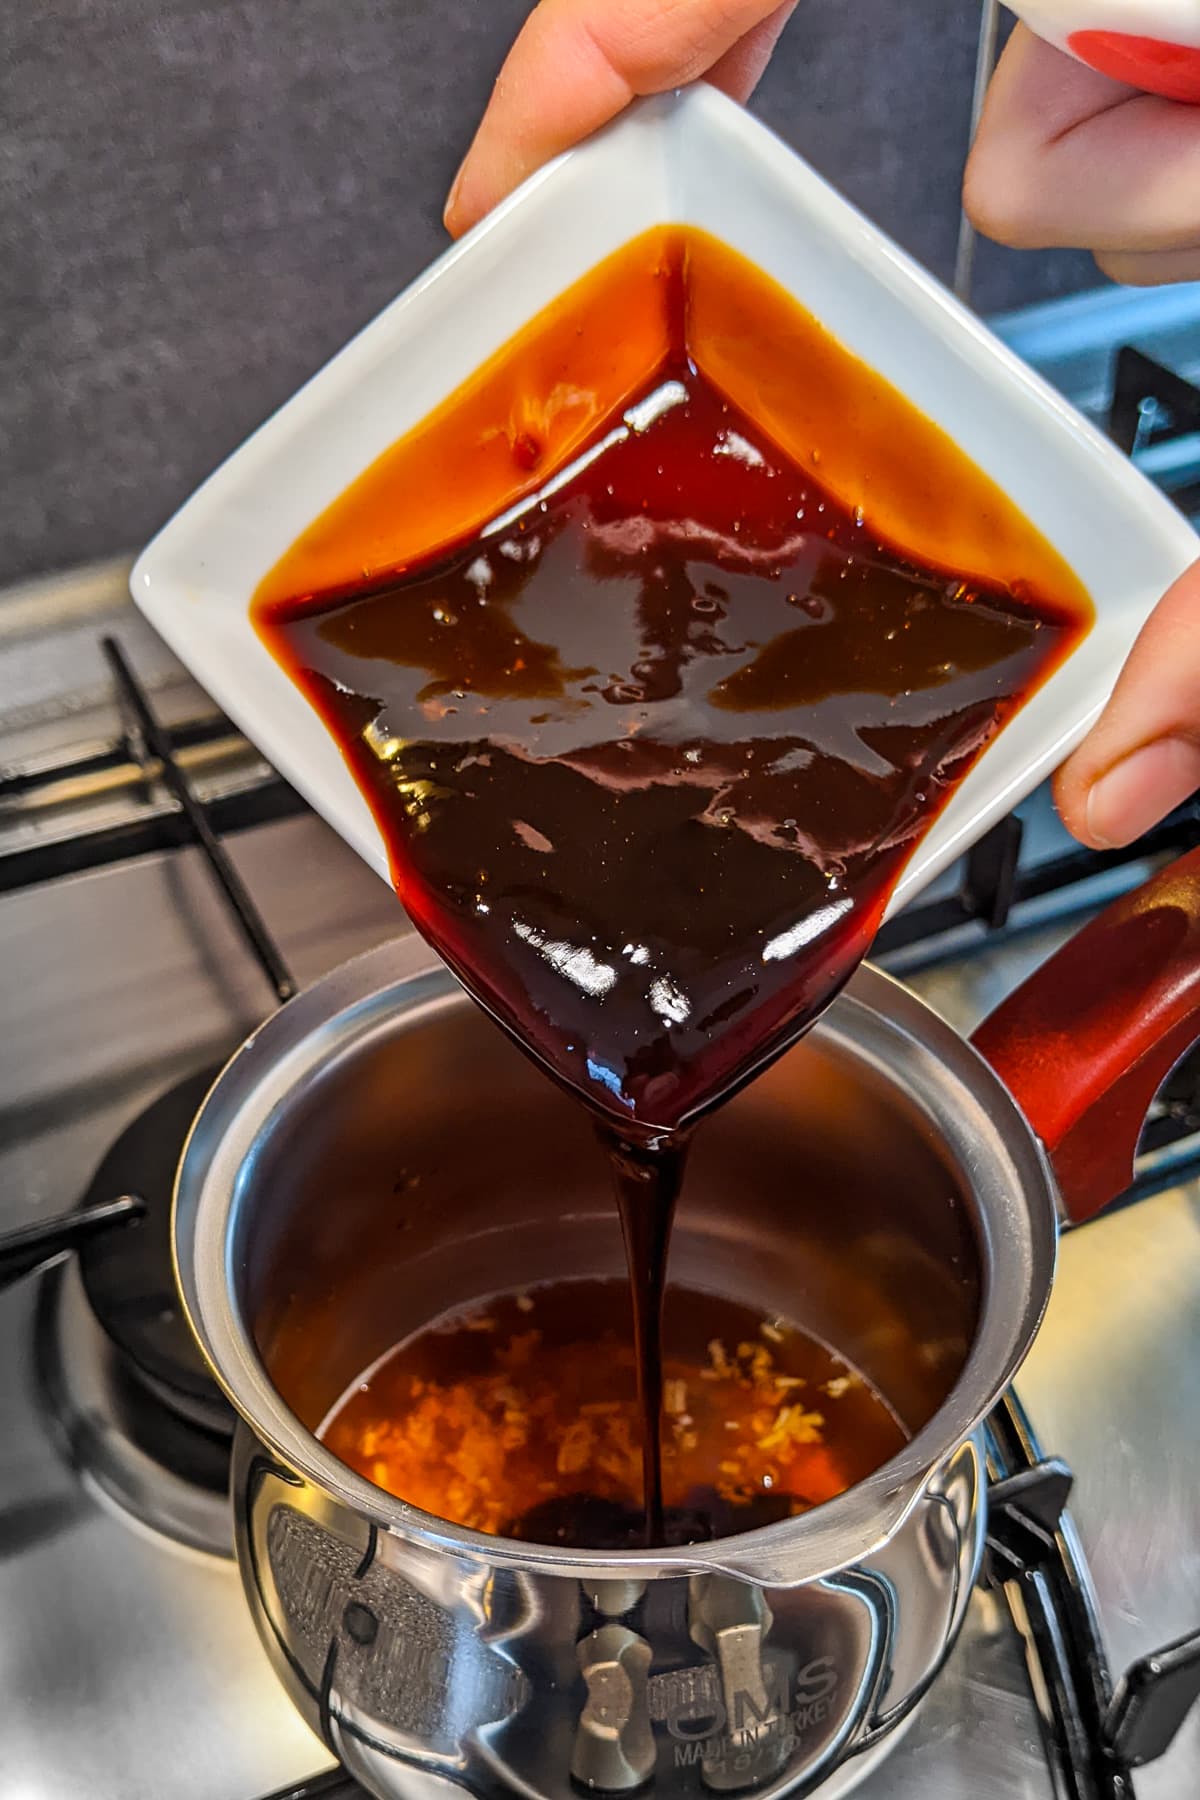 Pouring teriyaki sauce in a small sauce pan on the stove.